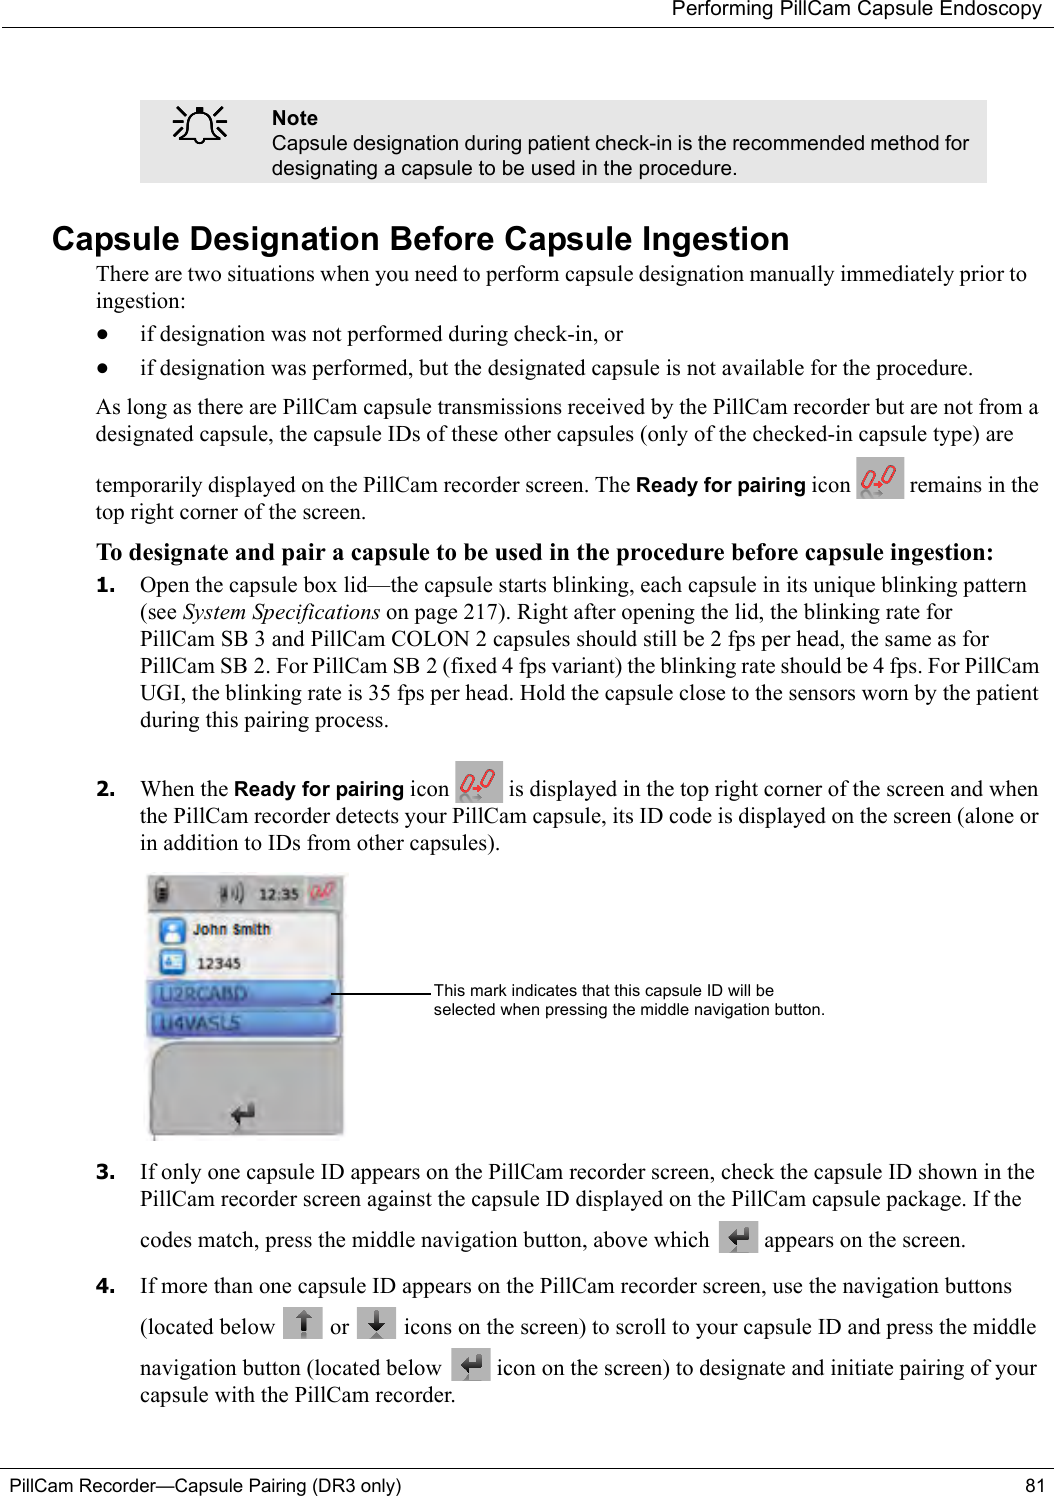 Performing PillCam Capsule EndoscopyPillCam Recorder—Capsule Pairing (DR3 only) 81Capsule Designation Before Capsule IngestionThere are two situations when you need to perform capsule designation manually immediately prior to ingestion:•if designation was not performed during check-in, or•if designation was performed, but the designated capsule is not available for the procedure.As long as there are PillCam capsule transmissions received by the PillCam recorder but are not from a designated capsule, the capsule IDs of these other capsules (only of the checked-in capsule type) are temporarily displayed on the PillCam recorder screen. The Ready for pairing icon   remains in the top right corner of the screen.To designate and pair a capsule to be used in the procedure before capsule ingestion:1. Open the capsule box lid—the capsule starts blinking, each capsule in its unique blinking pattern (see System Specifications on page 217). Right after opening the lid, the blinking rate for PillCam SB 3 and PillCam COLON 2 capsules should still be 2 fps per head, the same as for PillCam SB 2. For PillCam SB 2 (fixed 4 fps variant) the blinking rate should be 4 fps. For PillCam UGI, the blinking rate is 35 fps per head. Hold the capsule close to the sensors worn by the patient during this pairing process. 2. When the Ready for pairing icon   is displayed in the top right corner of the screen and when the PillCam recorder detects your PillCam capsule, its ID code is displayed on the screen (alone or in addition to IDs from other capsules). 3. If only one capsule ID appears on the PillCam recorder screen, check the capsule ID shown in the PillCam recorder screen against the capsule ID displayed on the PillCam capsule package. If the codes match, press the middle navigation button, above which   appears on the screen.4. If more than one capsule ID appears on the PillCam recorder screen, use the navigation buttons (located below   or   icons on the screen) to scroll to your capsule ID and press the middle navigation button (located below   icon on the screen) to designate and initiate pairing of your capsule with the PillCam recorder.֠֠֠֠NoteCapsule designation during patient check-in is the recommended method for designating a capsule to be used in the procedure.This mark indicates that this capsule ID will be selected when pressing the middle navigation button.